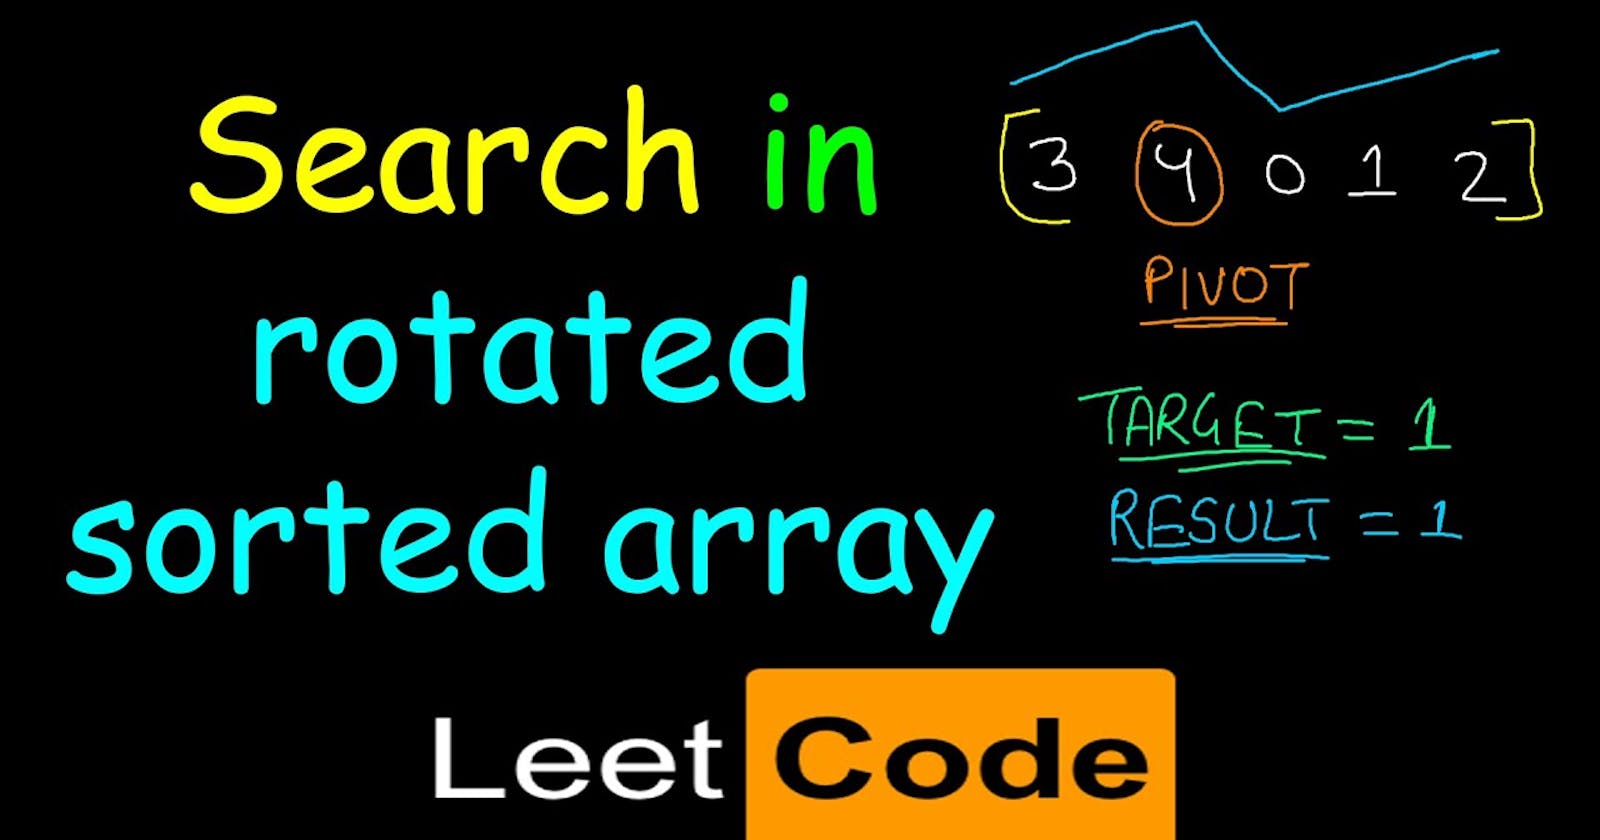 81 Search in Rotated Sorted Array II